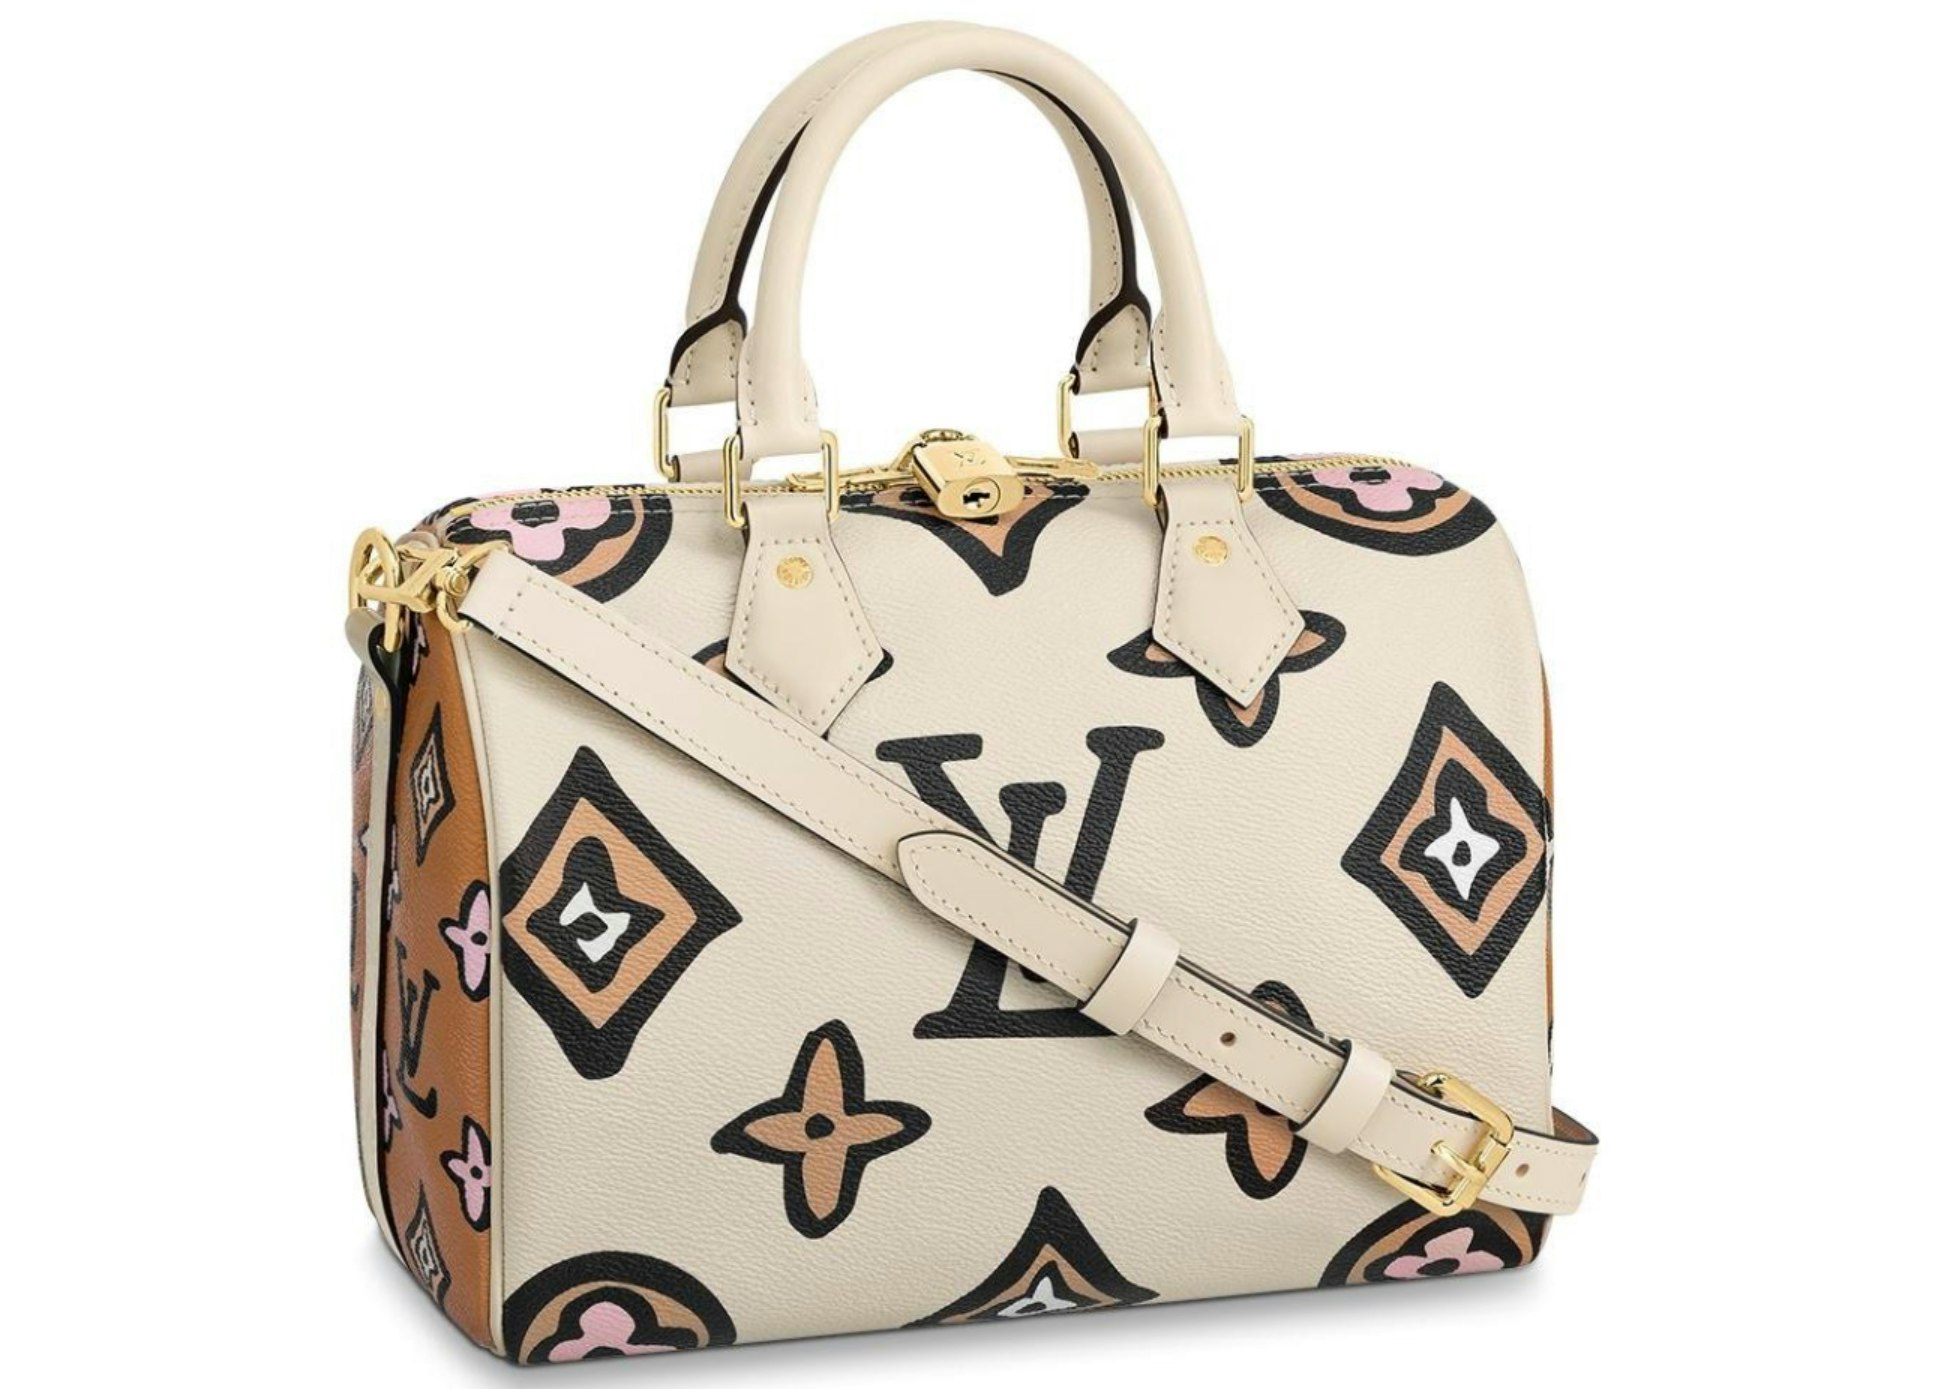 Louis Vuitton Wild At Heart Collection Handbags and Small Leather Goods   Bagaholic